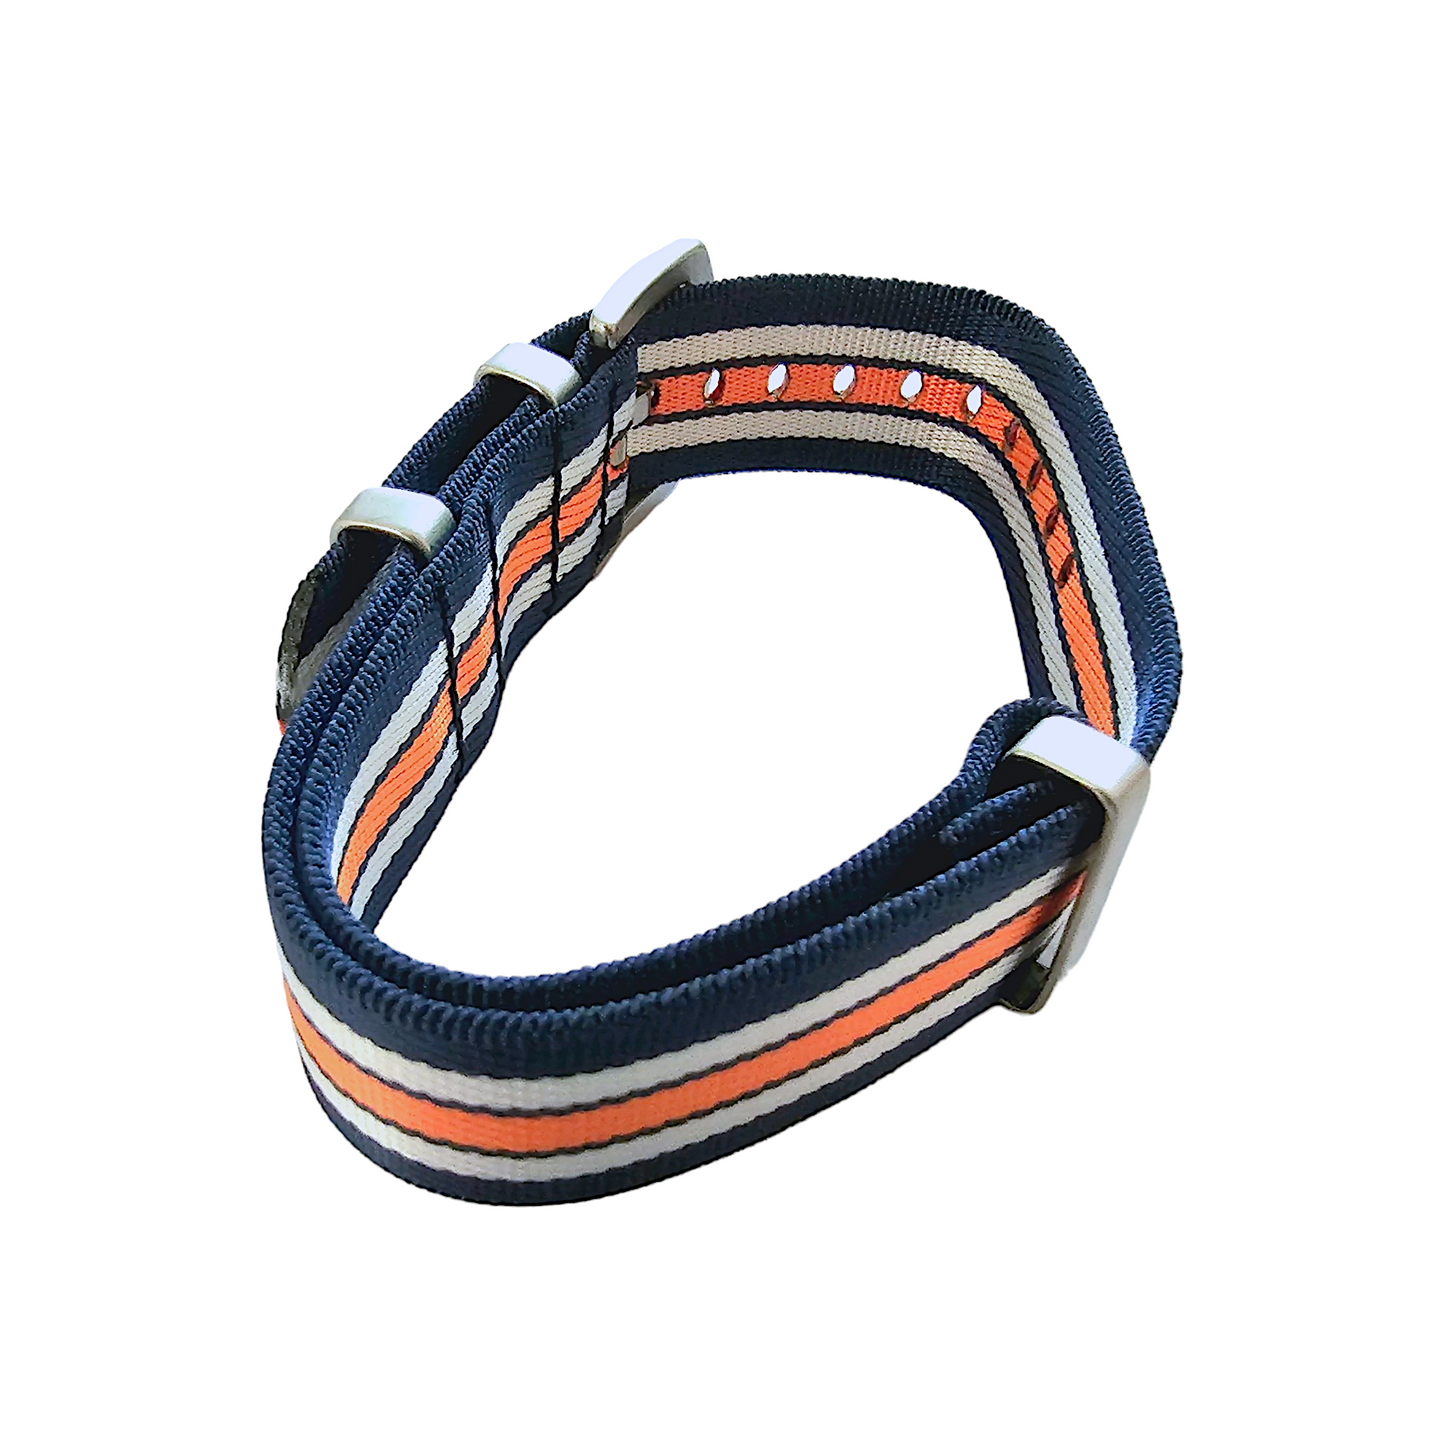 High Quality 1.8mm Thick NATO Watch Strap Band 18mm 20mm 22mm Blue White Orange